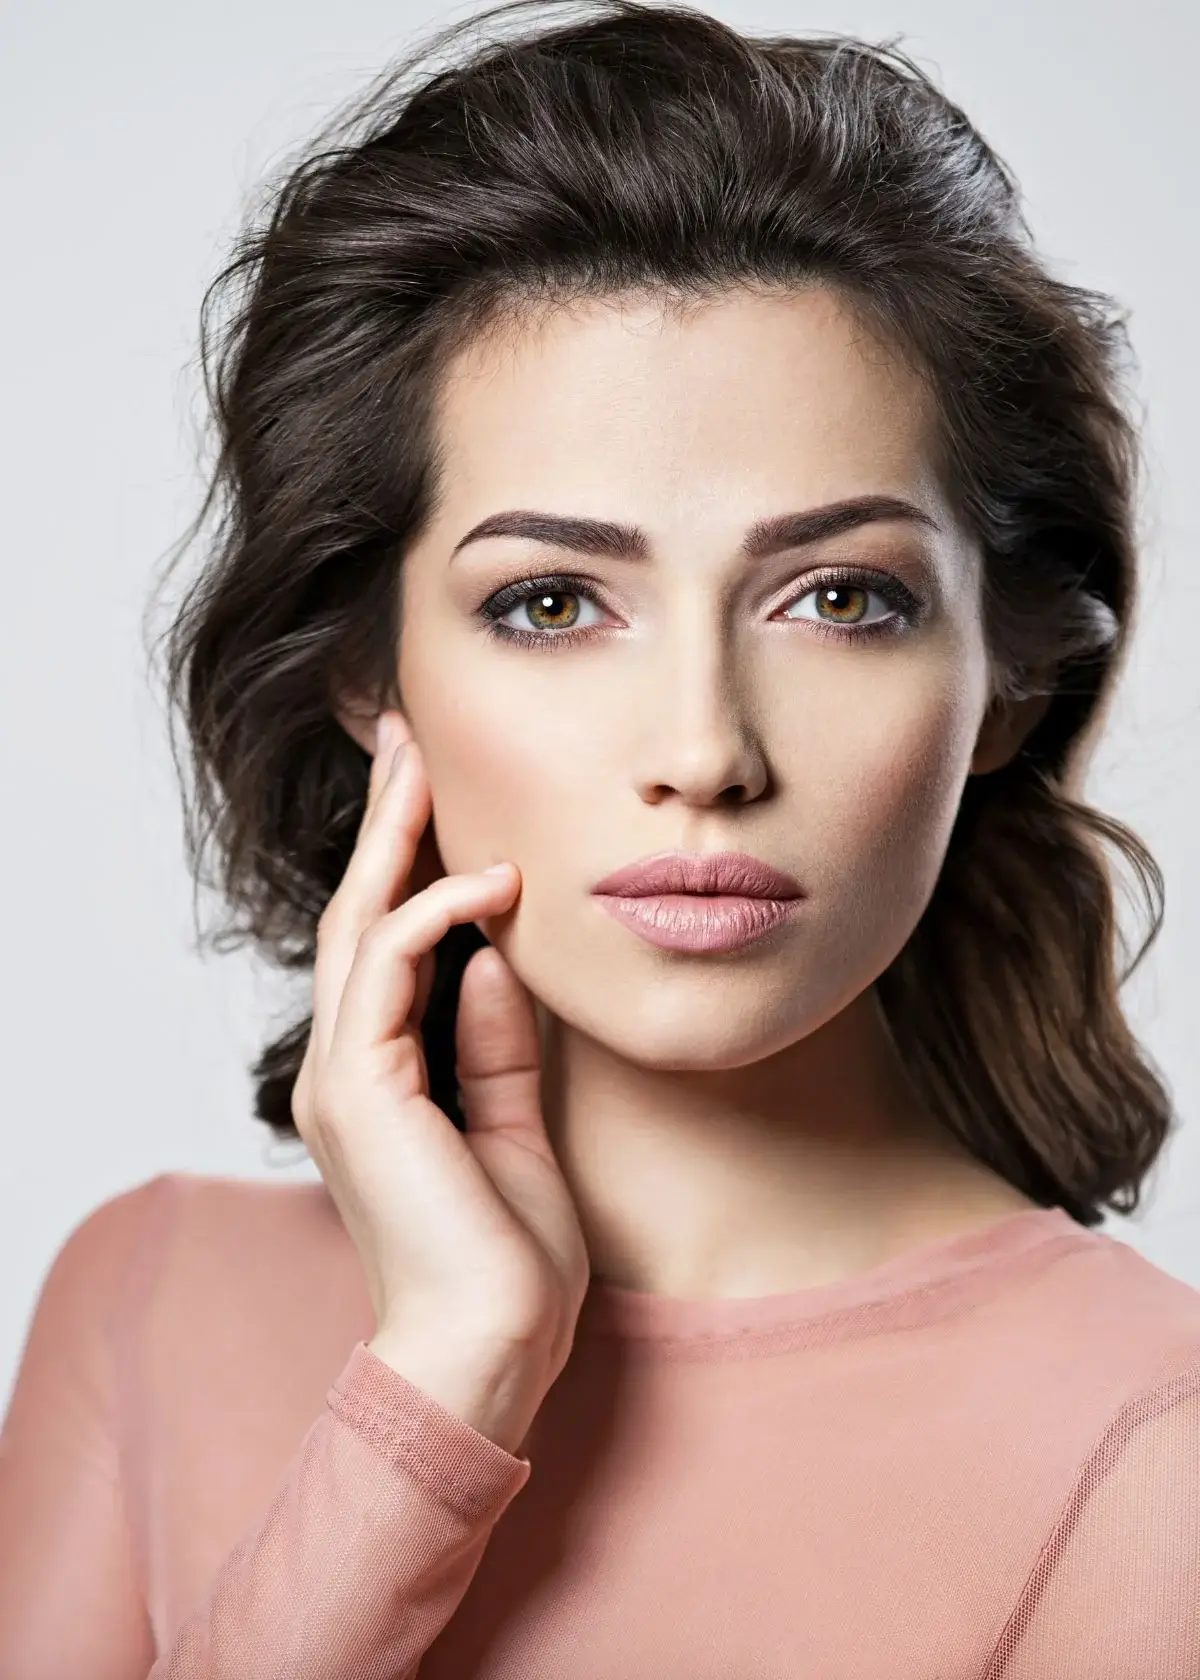 What are the benefits of oil-free foundations for oily skin?